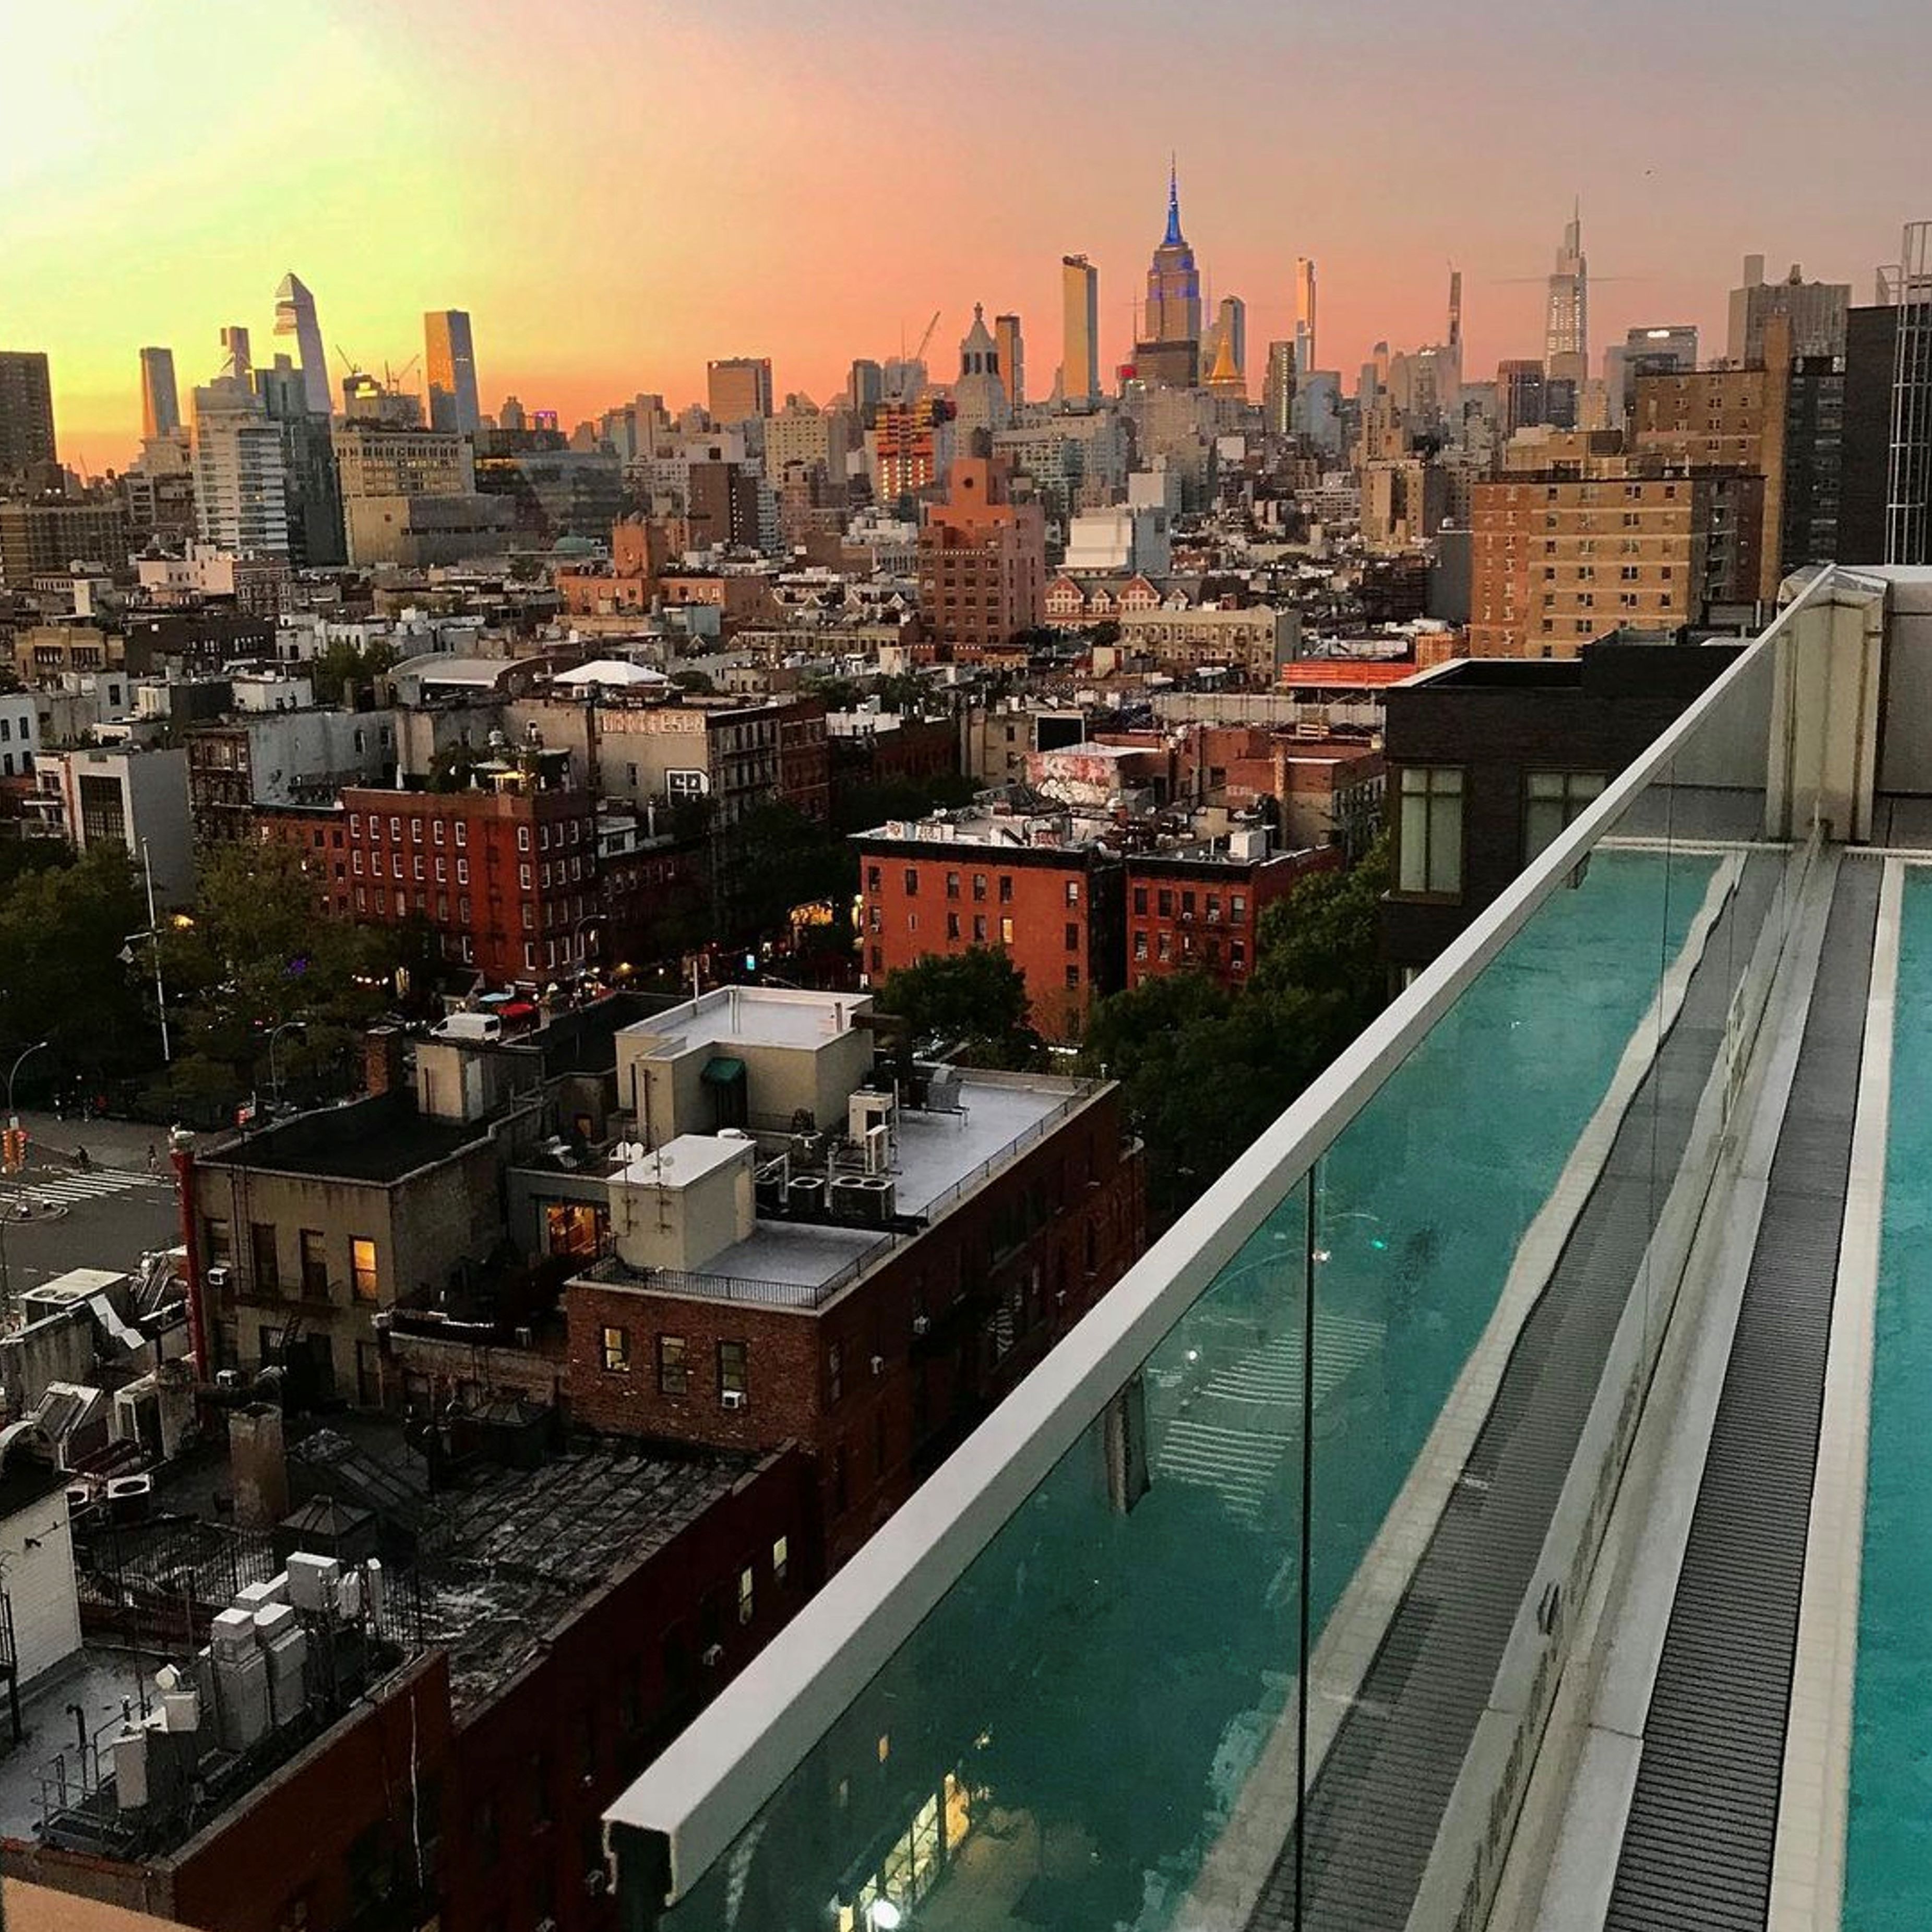 View of New York City from our rooftop at dusk